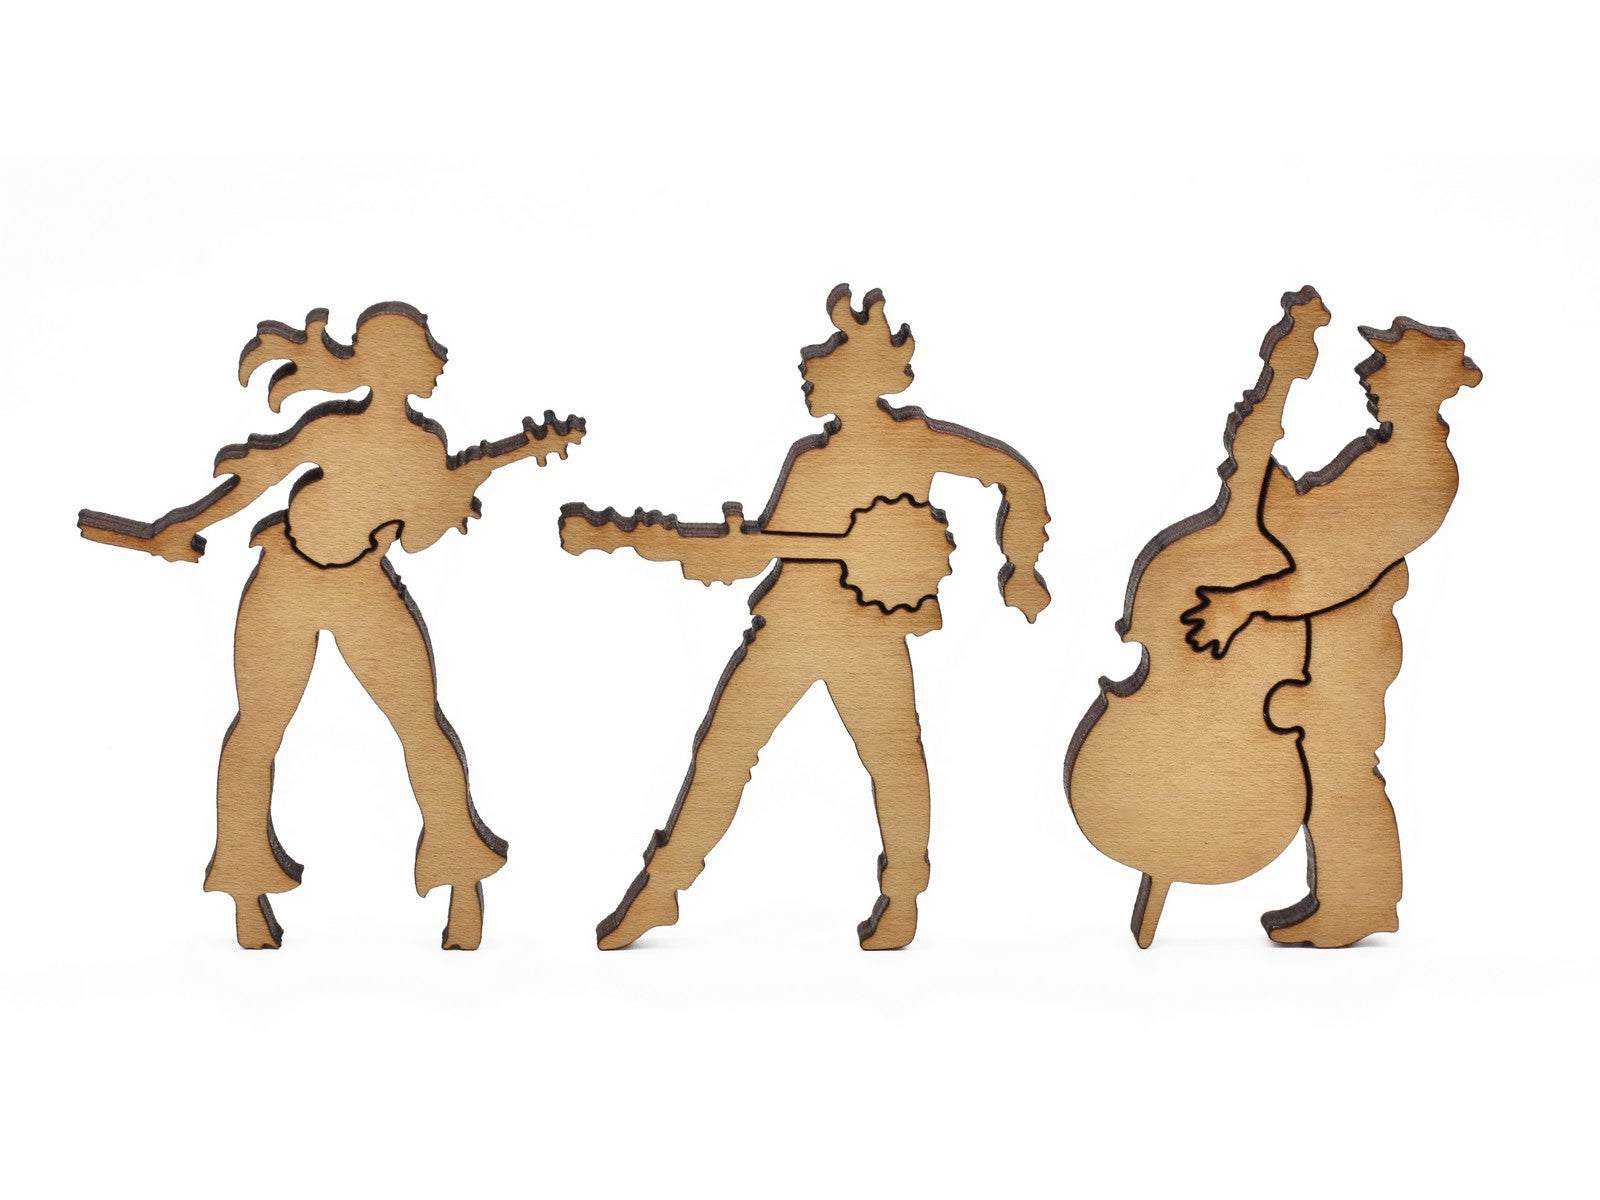 A closeup of pieces in the shape of three musicians.